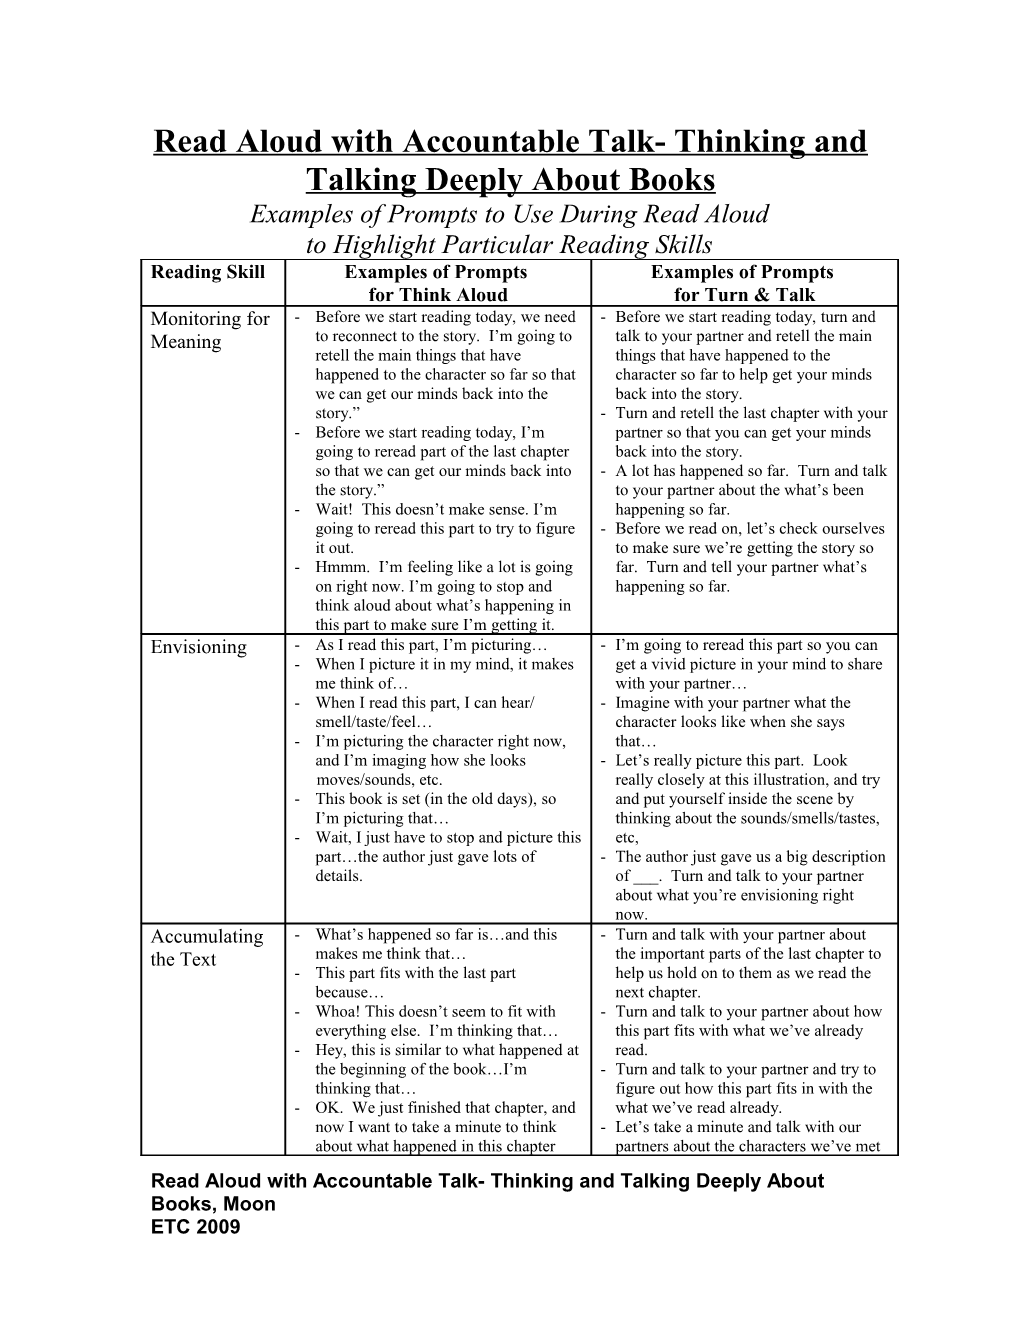 Read Aloud With Accountable Talk- Thinking And Talking Deeply About Books